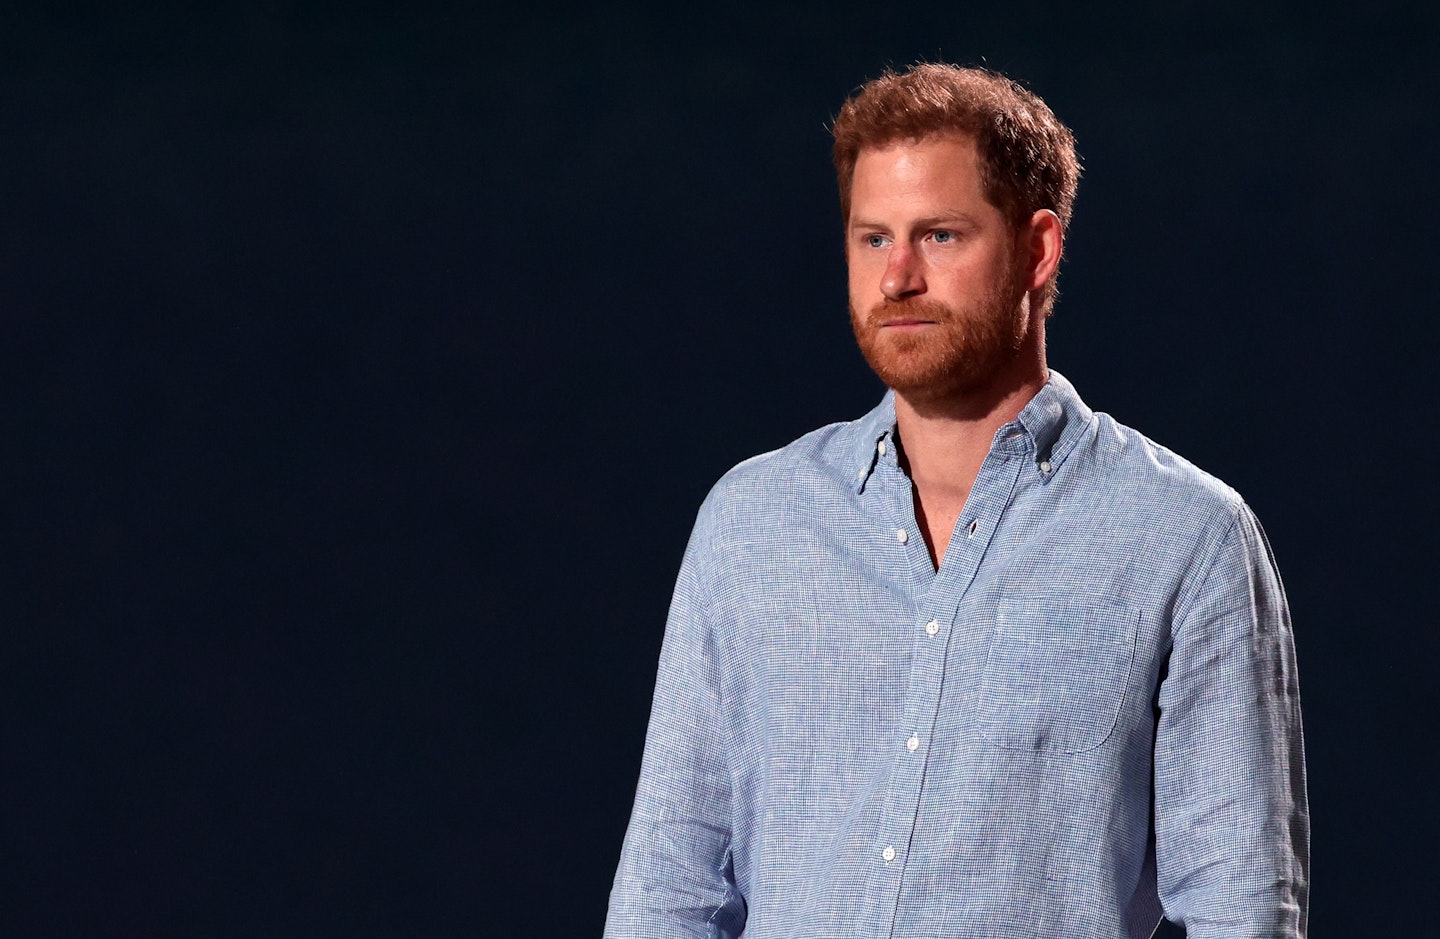 , Prince Harry, The Duke of Sussex, speaks onstage during Global Citizen VAX LIVE in California, 2021